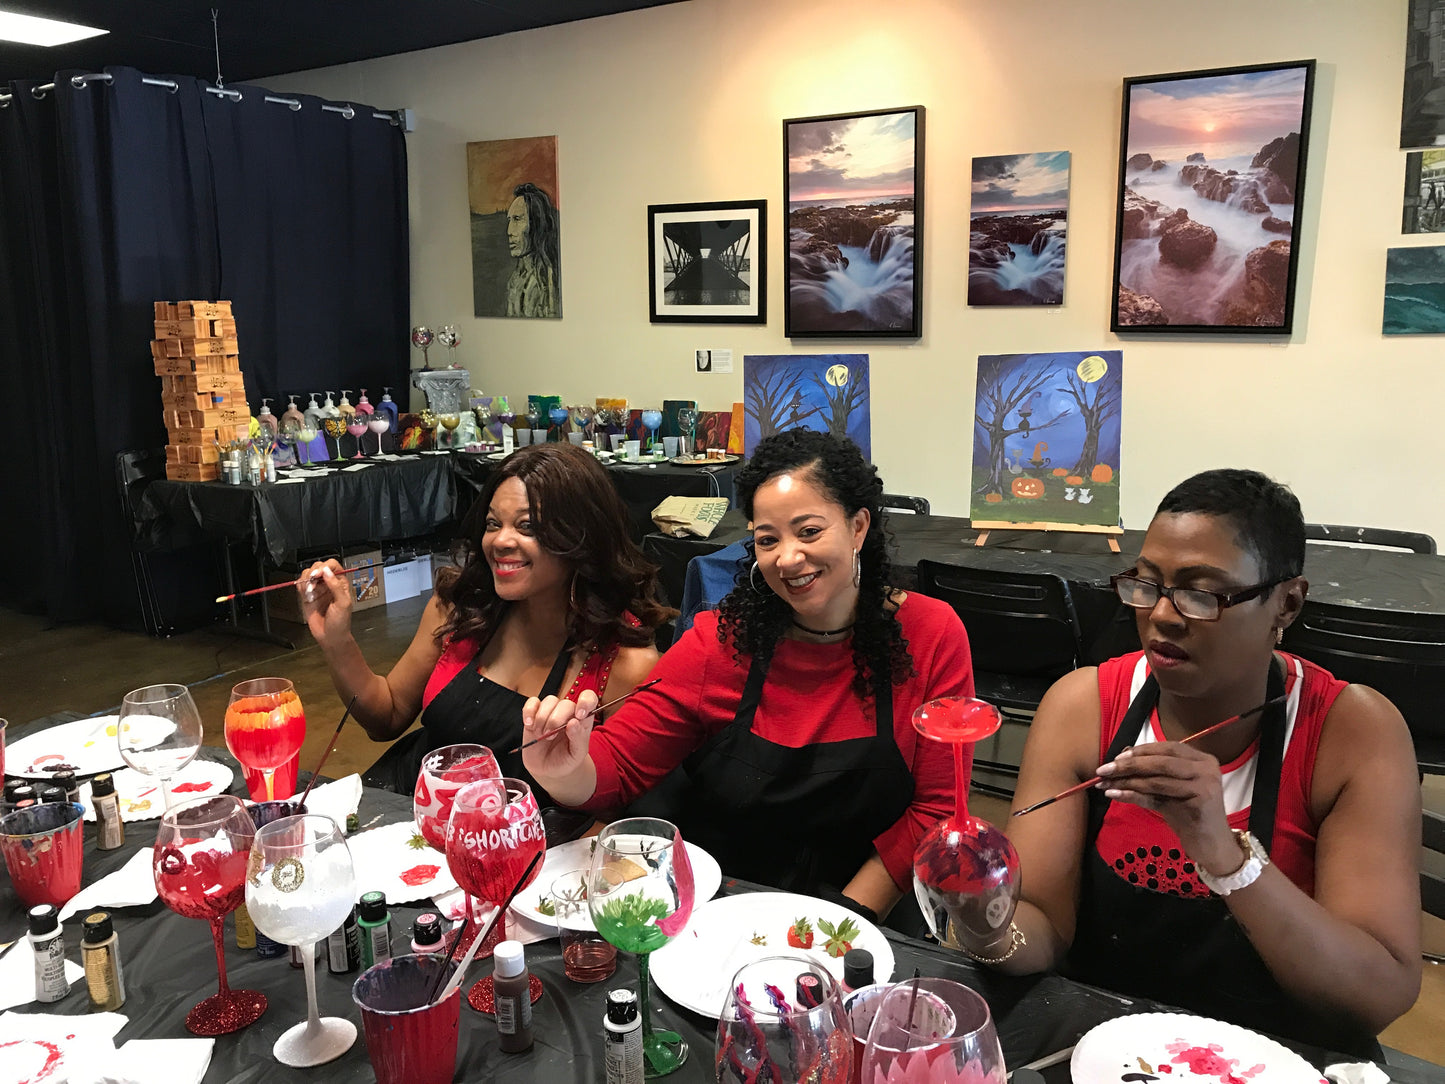 Thu, Jul 18, 5-8pm "Drinks & Designs" Houston Wine & Painting Party